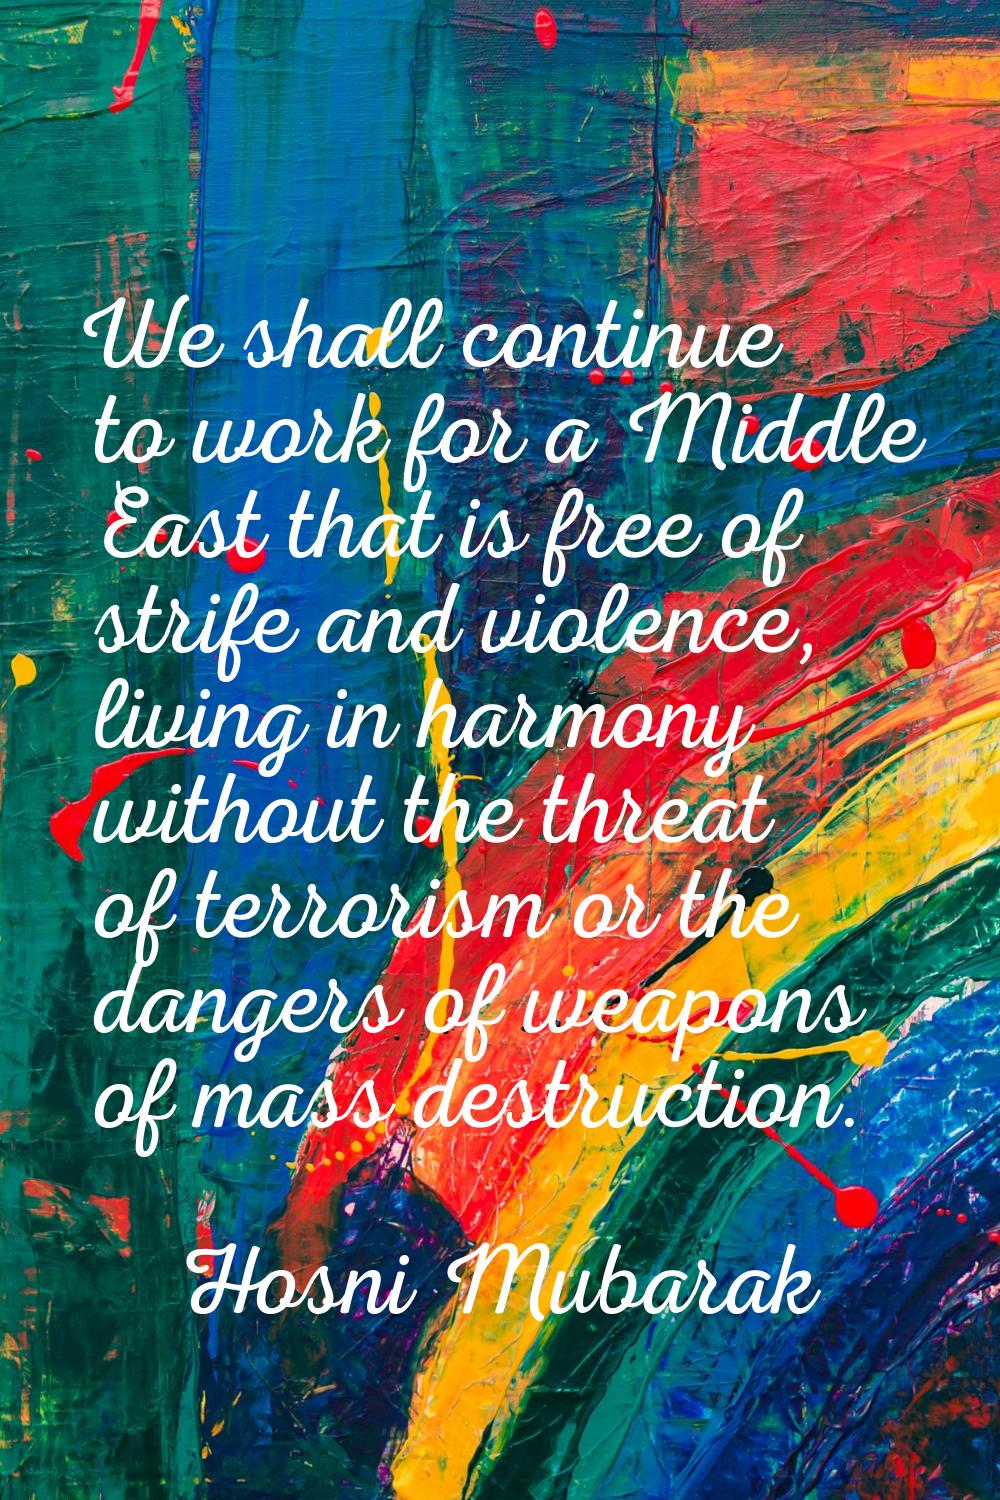 We shall continue to work for a Middle East that is free of strife and violence, living in harmony 